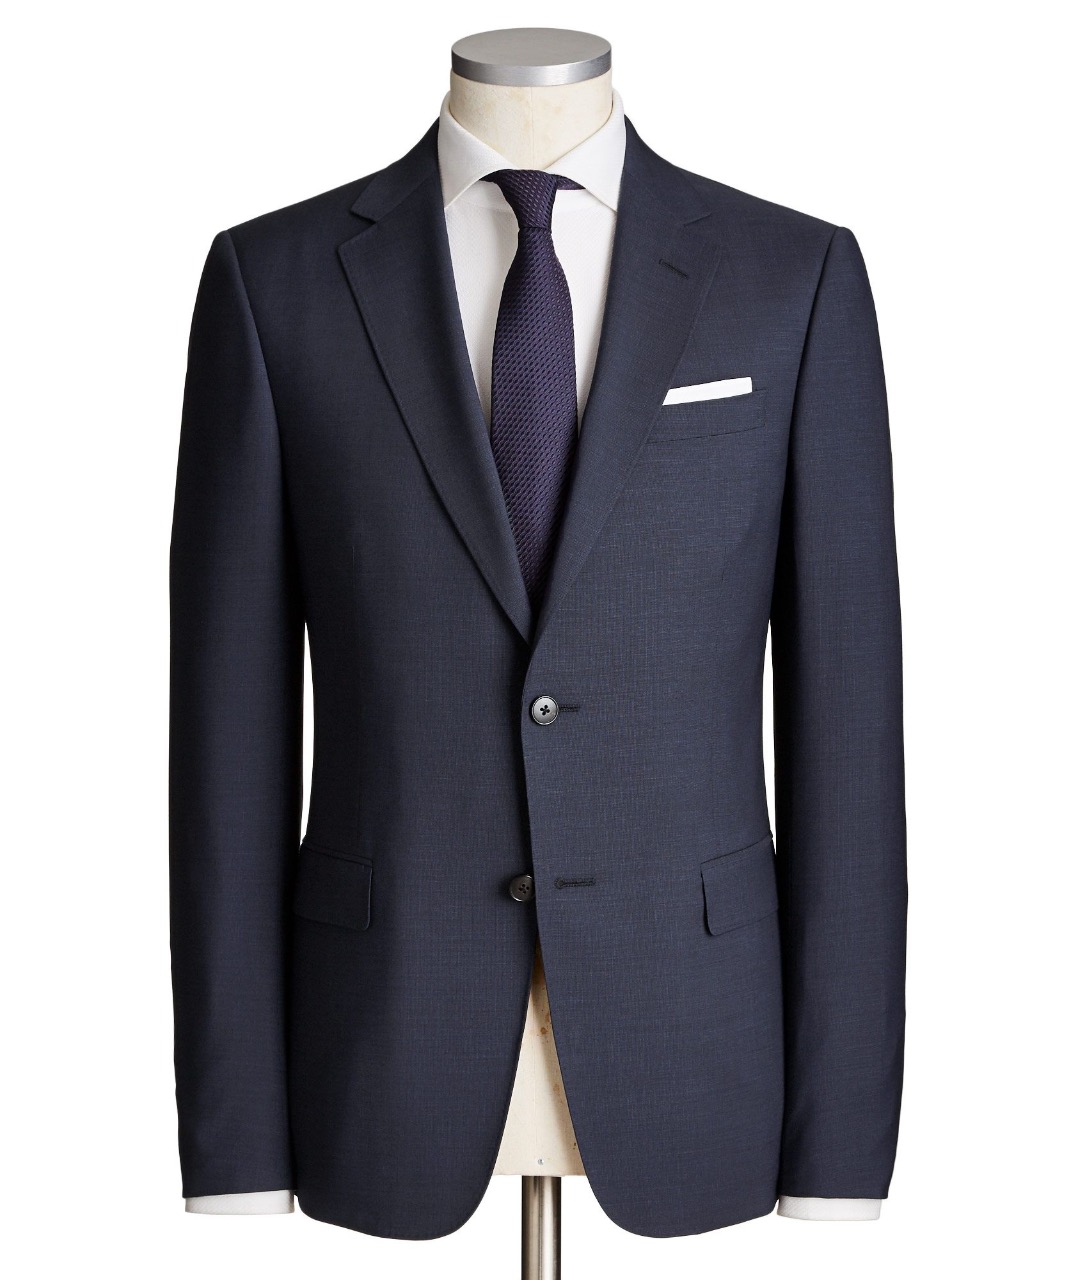 Product | suits makers